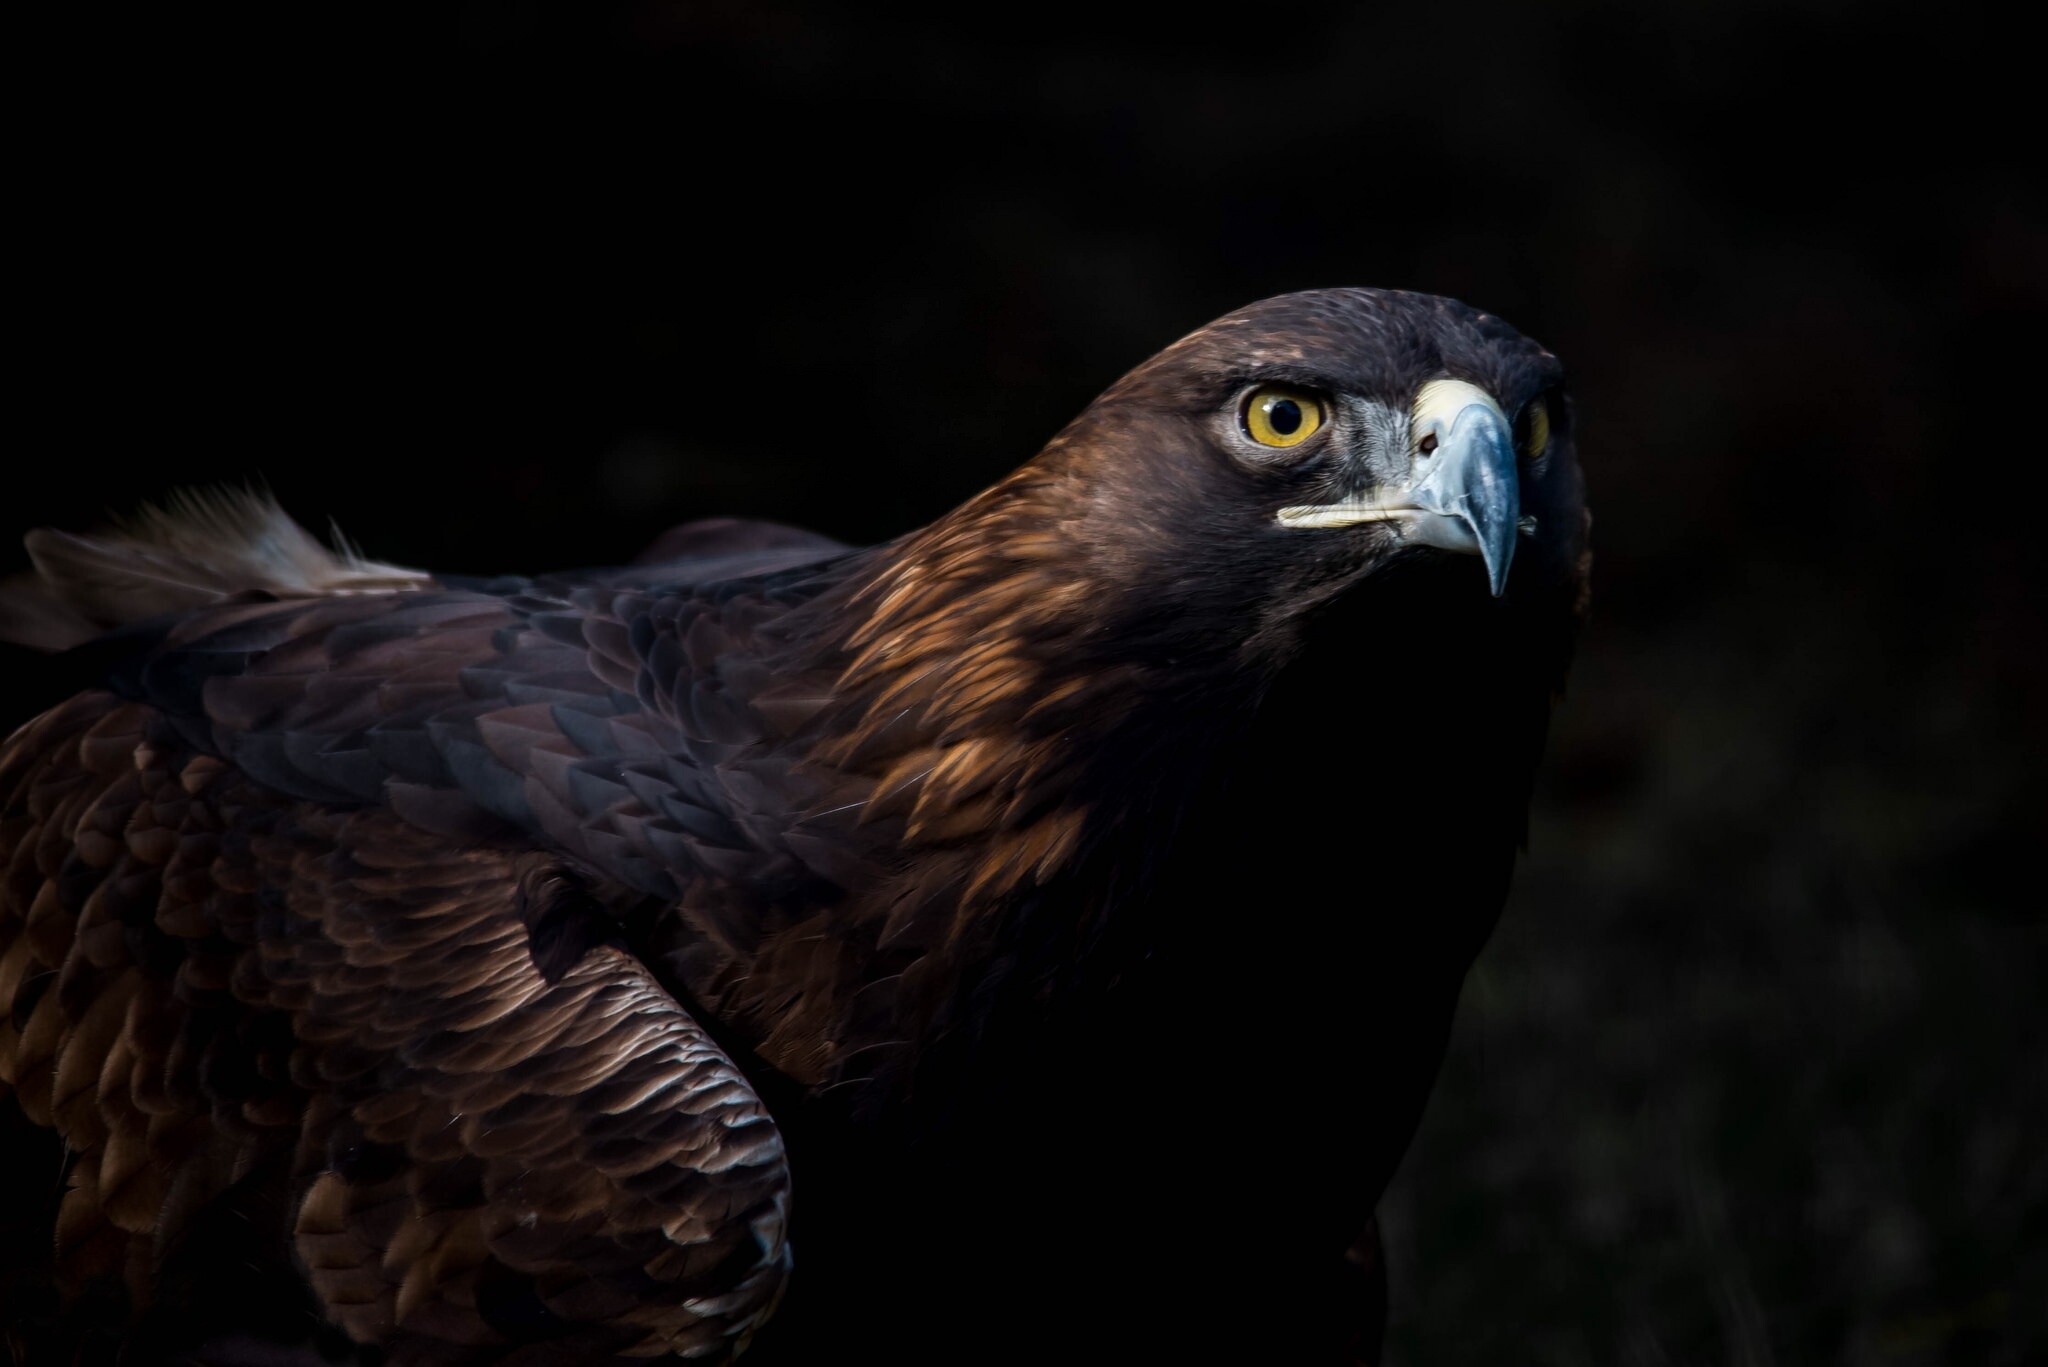 Golden Eagle: A bird of prey in the family Accipitridae, A large hooked beak enabling to rip the flesh from the prey. 2050x1370 HD Wallpaper.